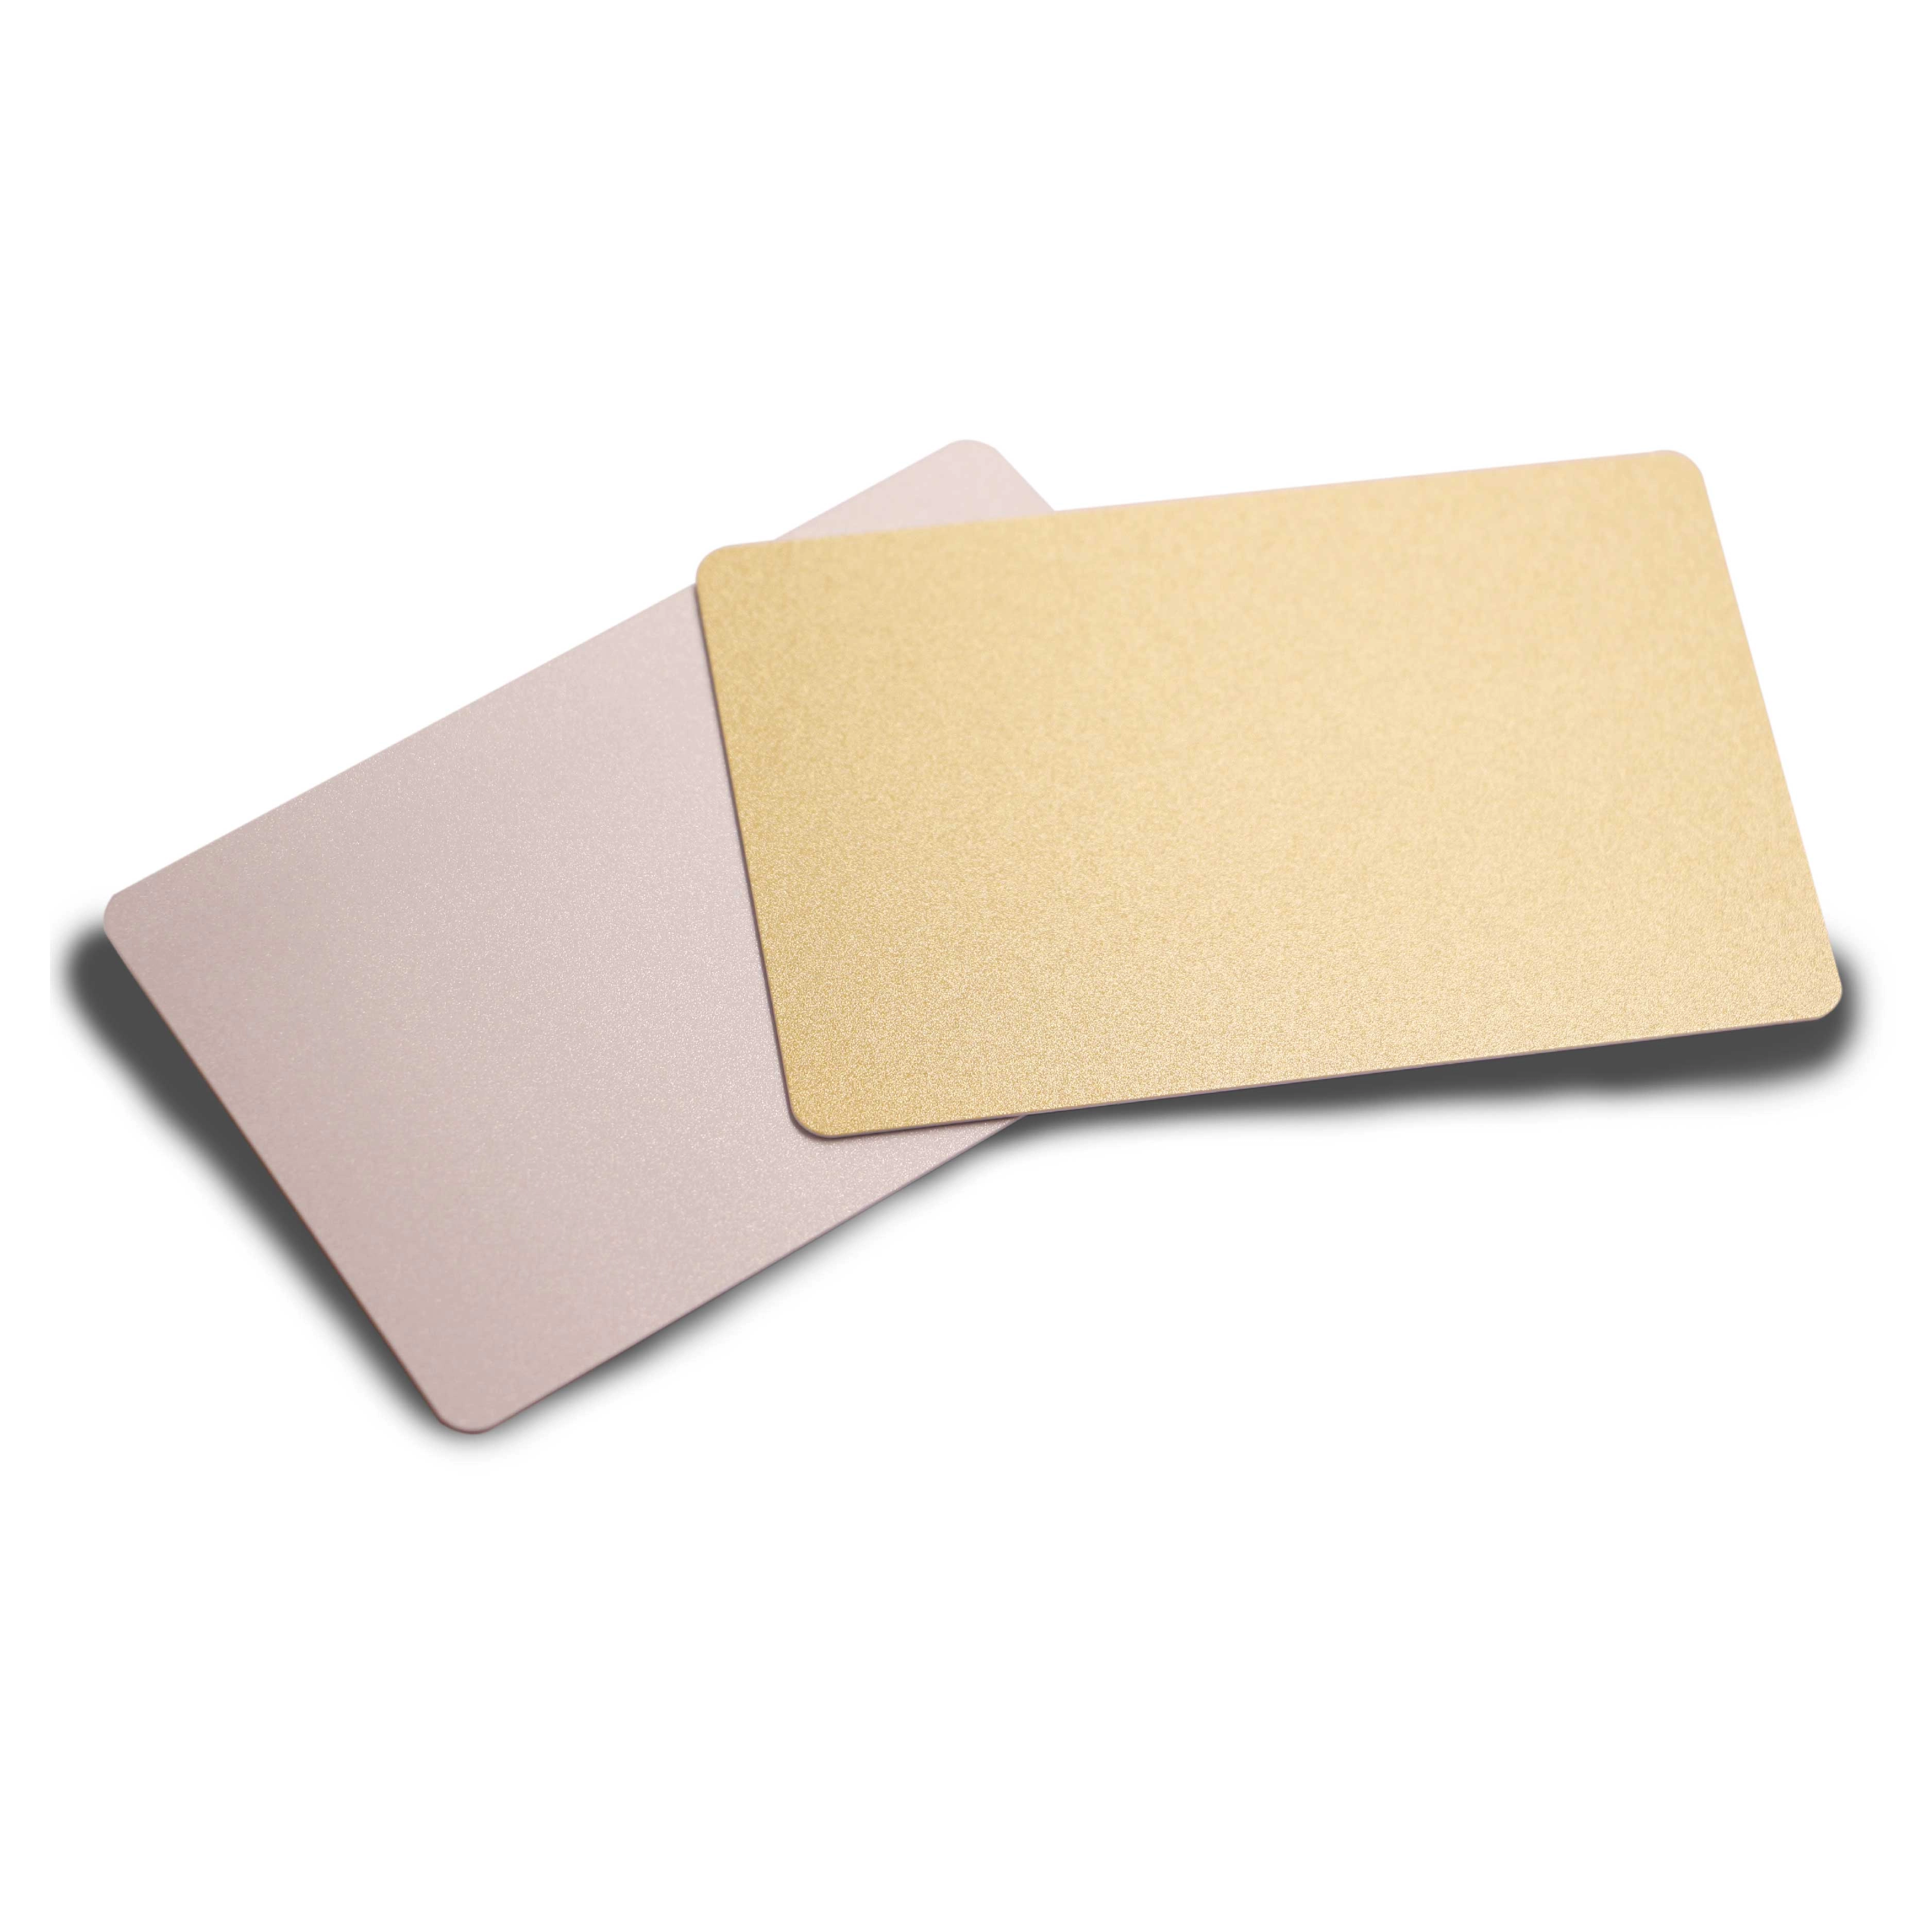 Gold Flushed Colors Blank Cards for Printing